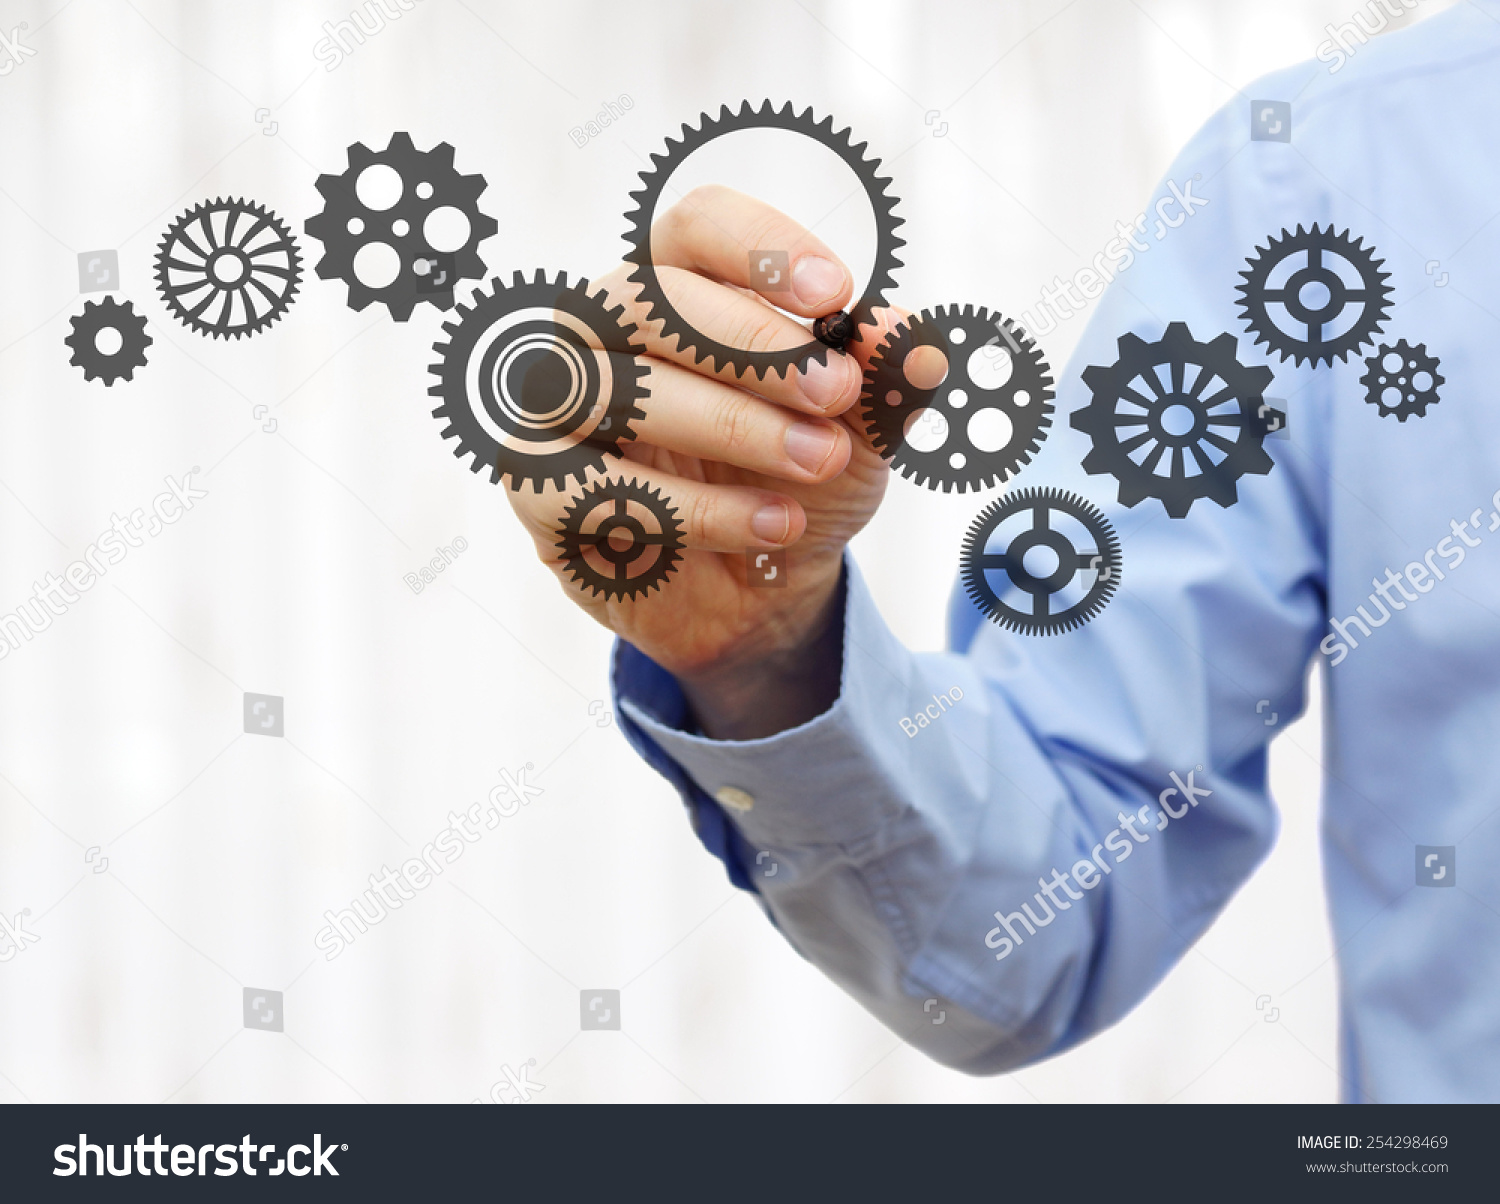 engineer draws a chain sprockets. Technology and industry concept #254298469